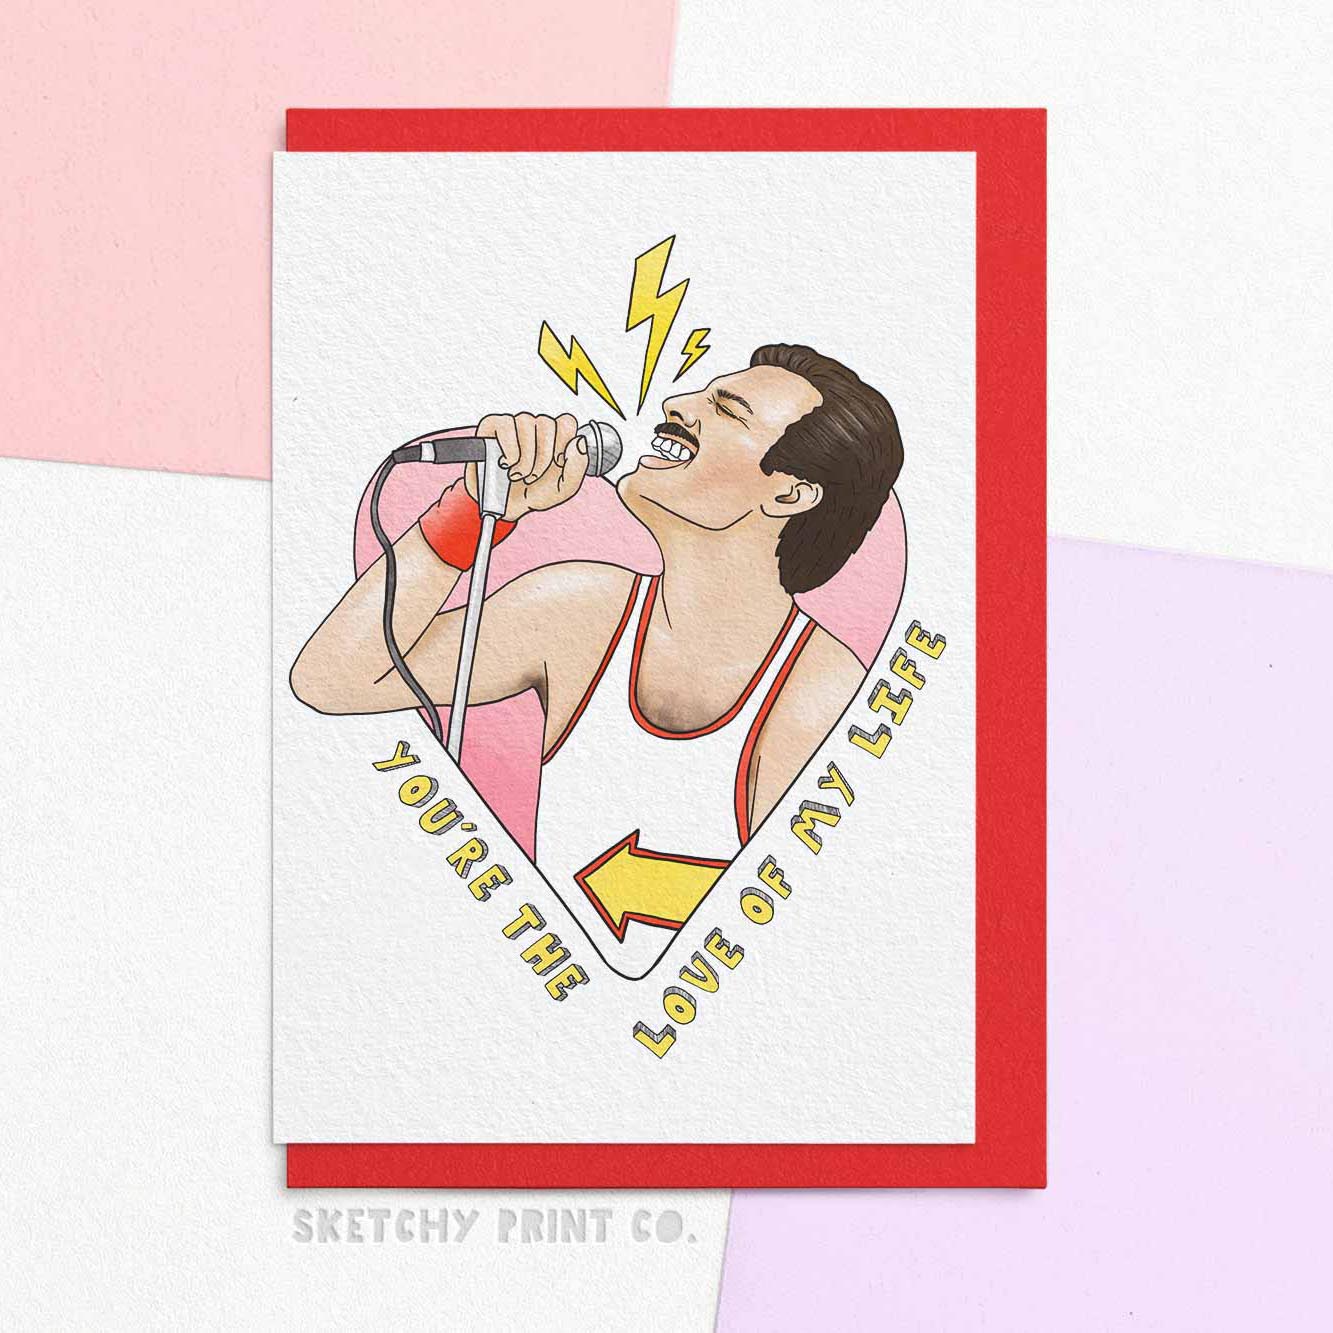 Funny Rude Silly Valentine’s Day Cards Freddy Mercury boyfriend girlfriend unique gift unusual hilarious illustrated sketchy print co